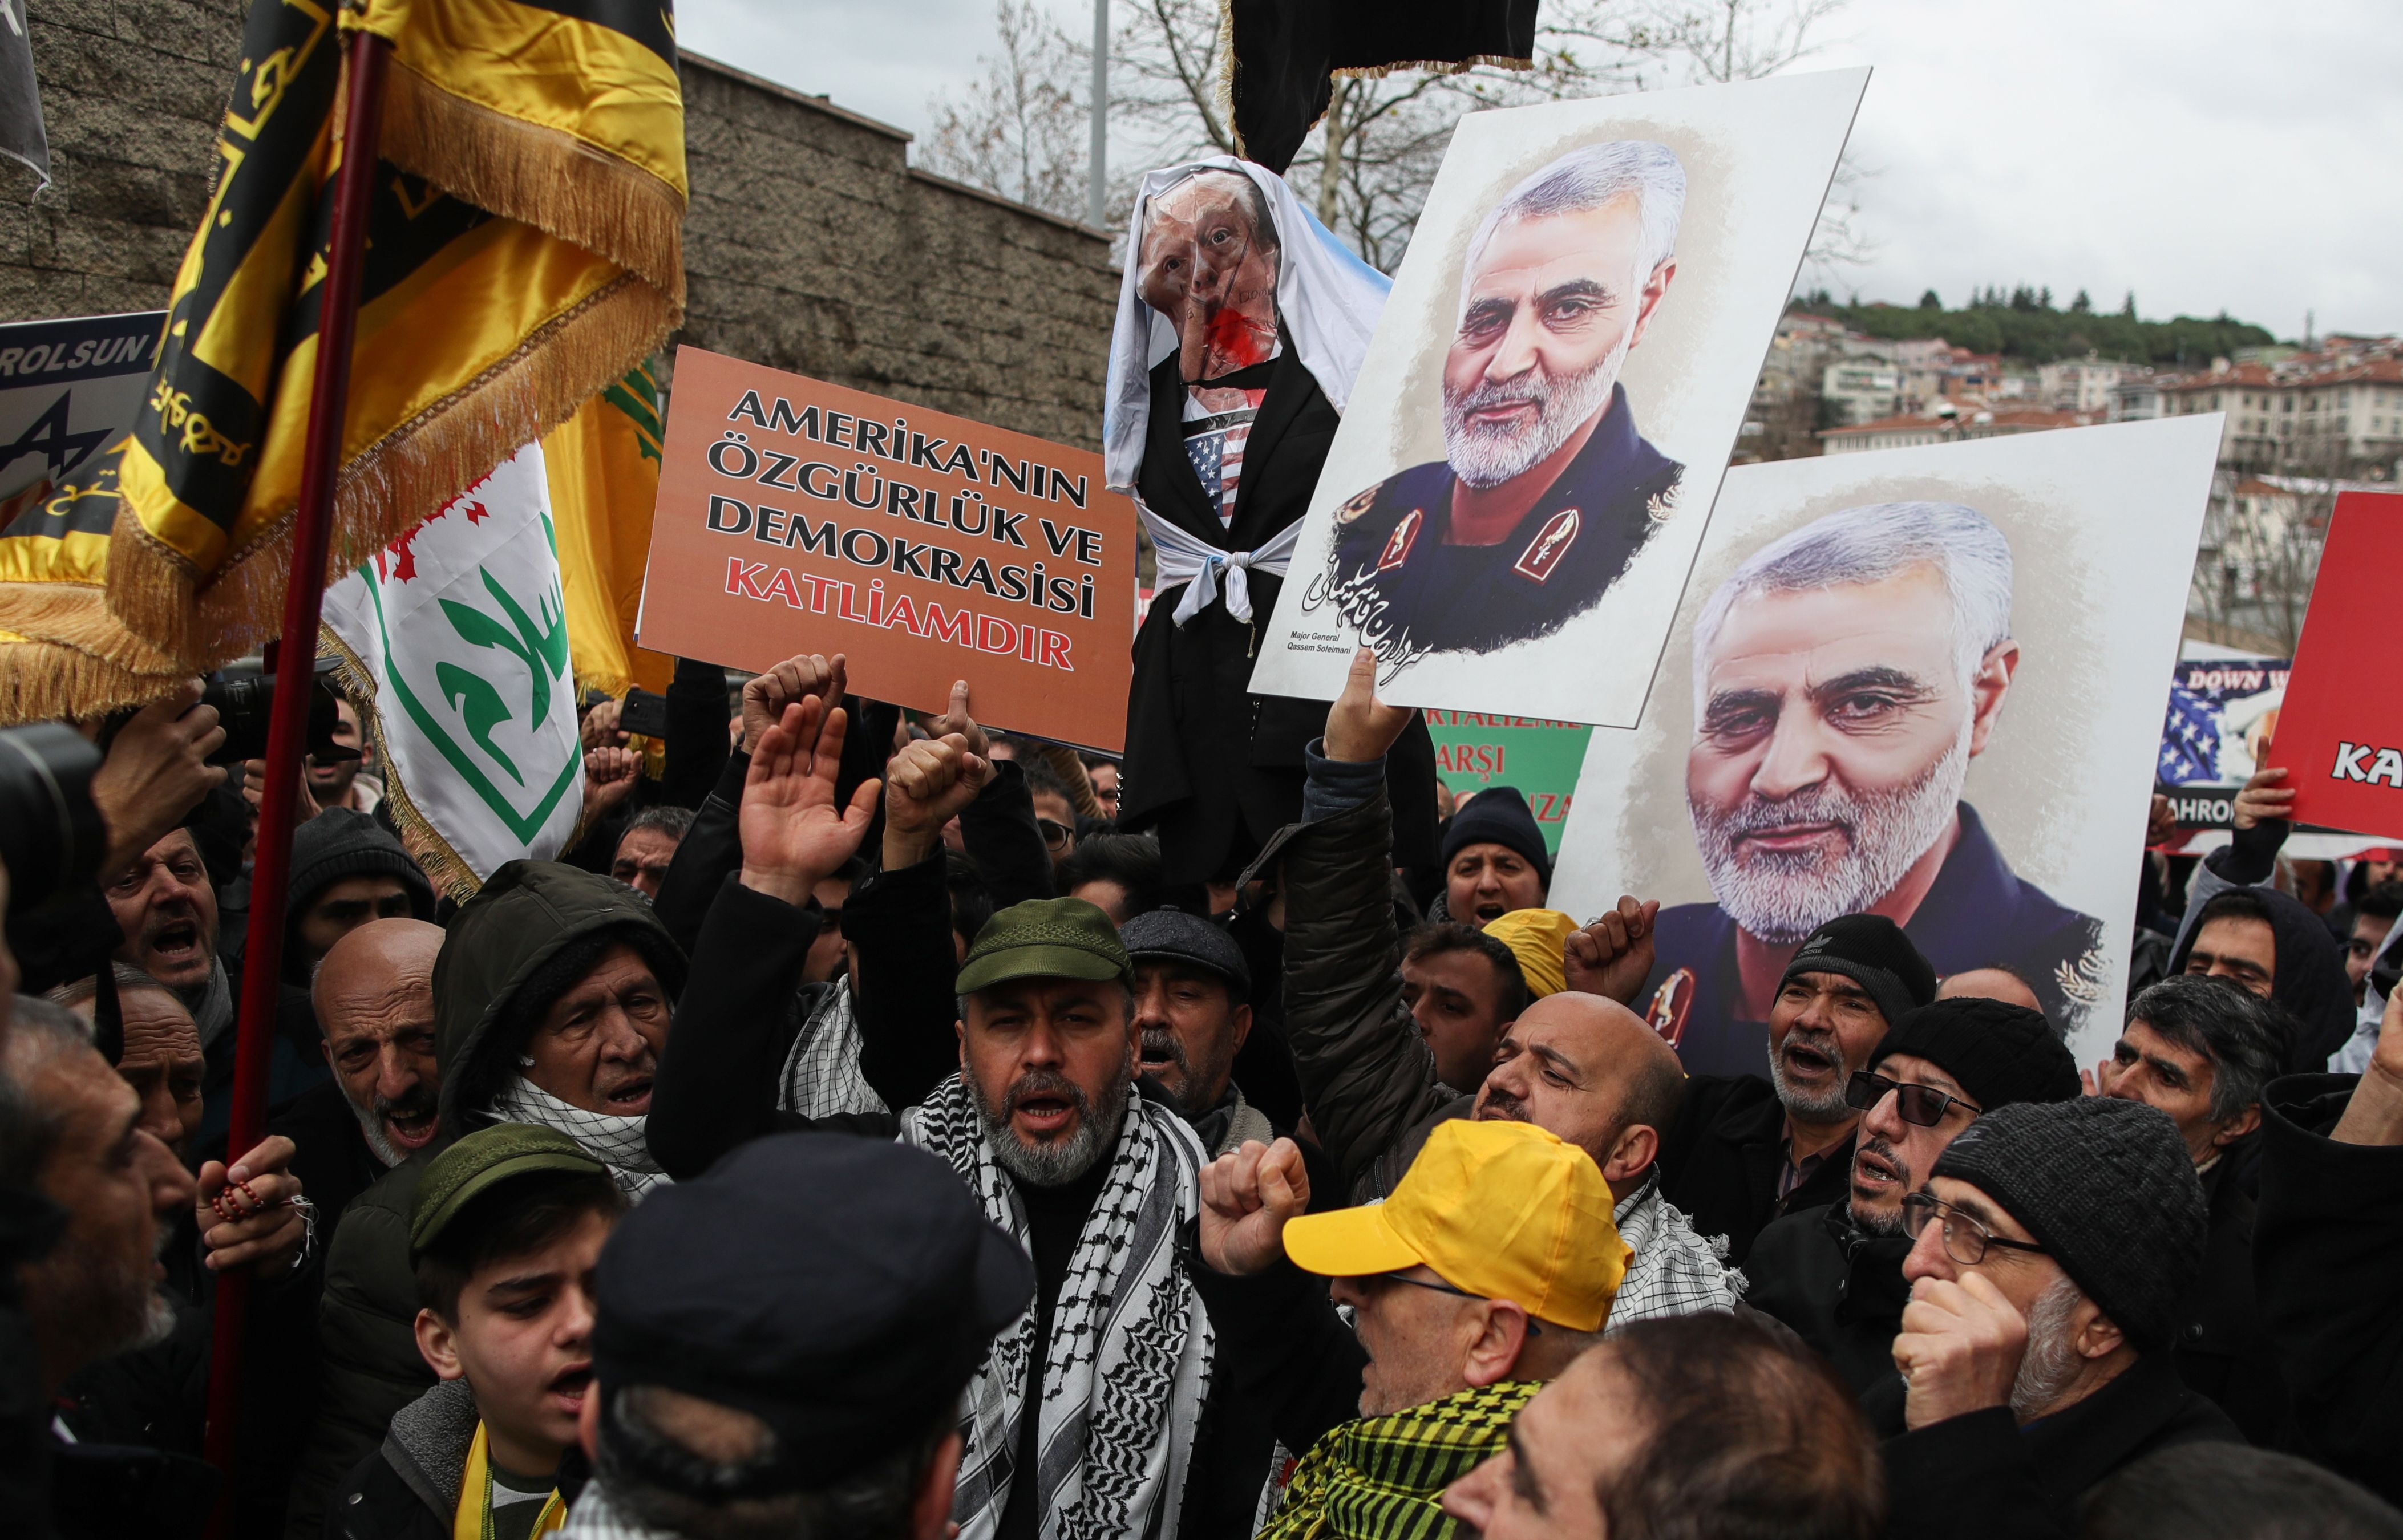 Protesters hold placards showing a portrait of slain Iranian Revolutionary Guards Corps (IRGC) Lieutenant general and commander of the Quds Force Qasem Soleimani and effigy of US President Donald Trump during a demonstration in front of the US consulate in Istanbul, Turkey.